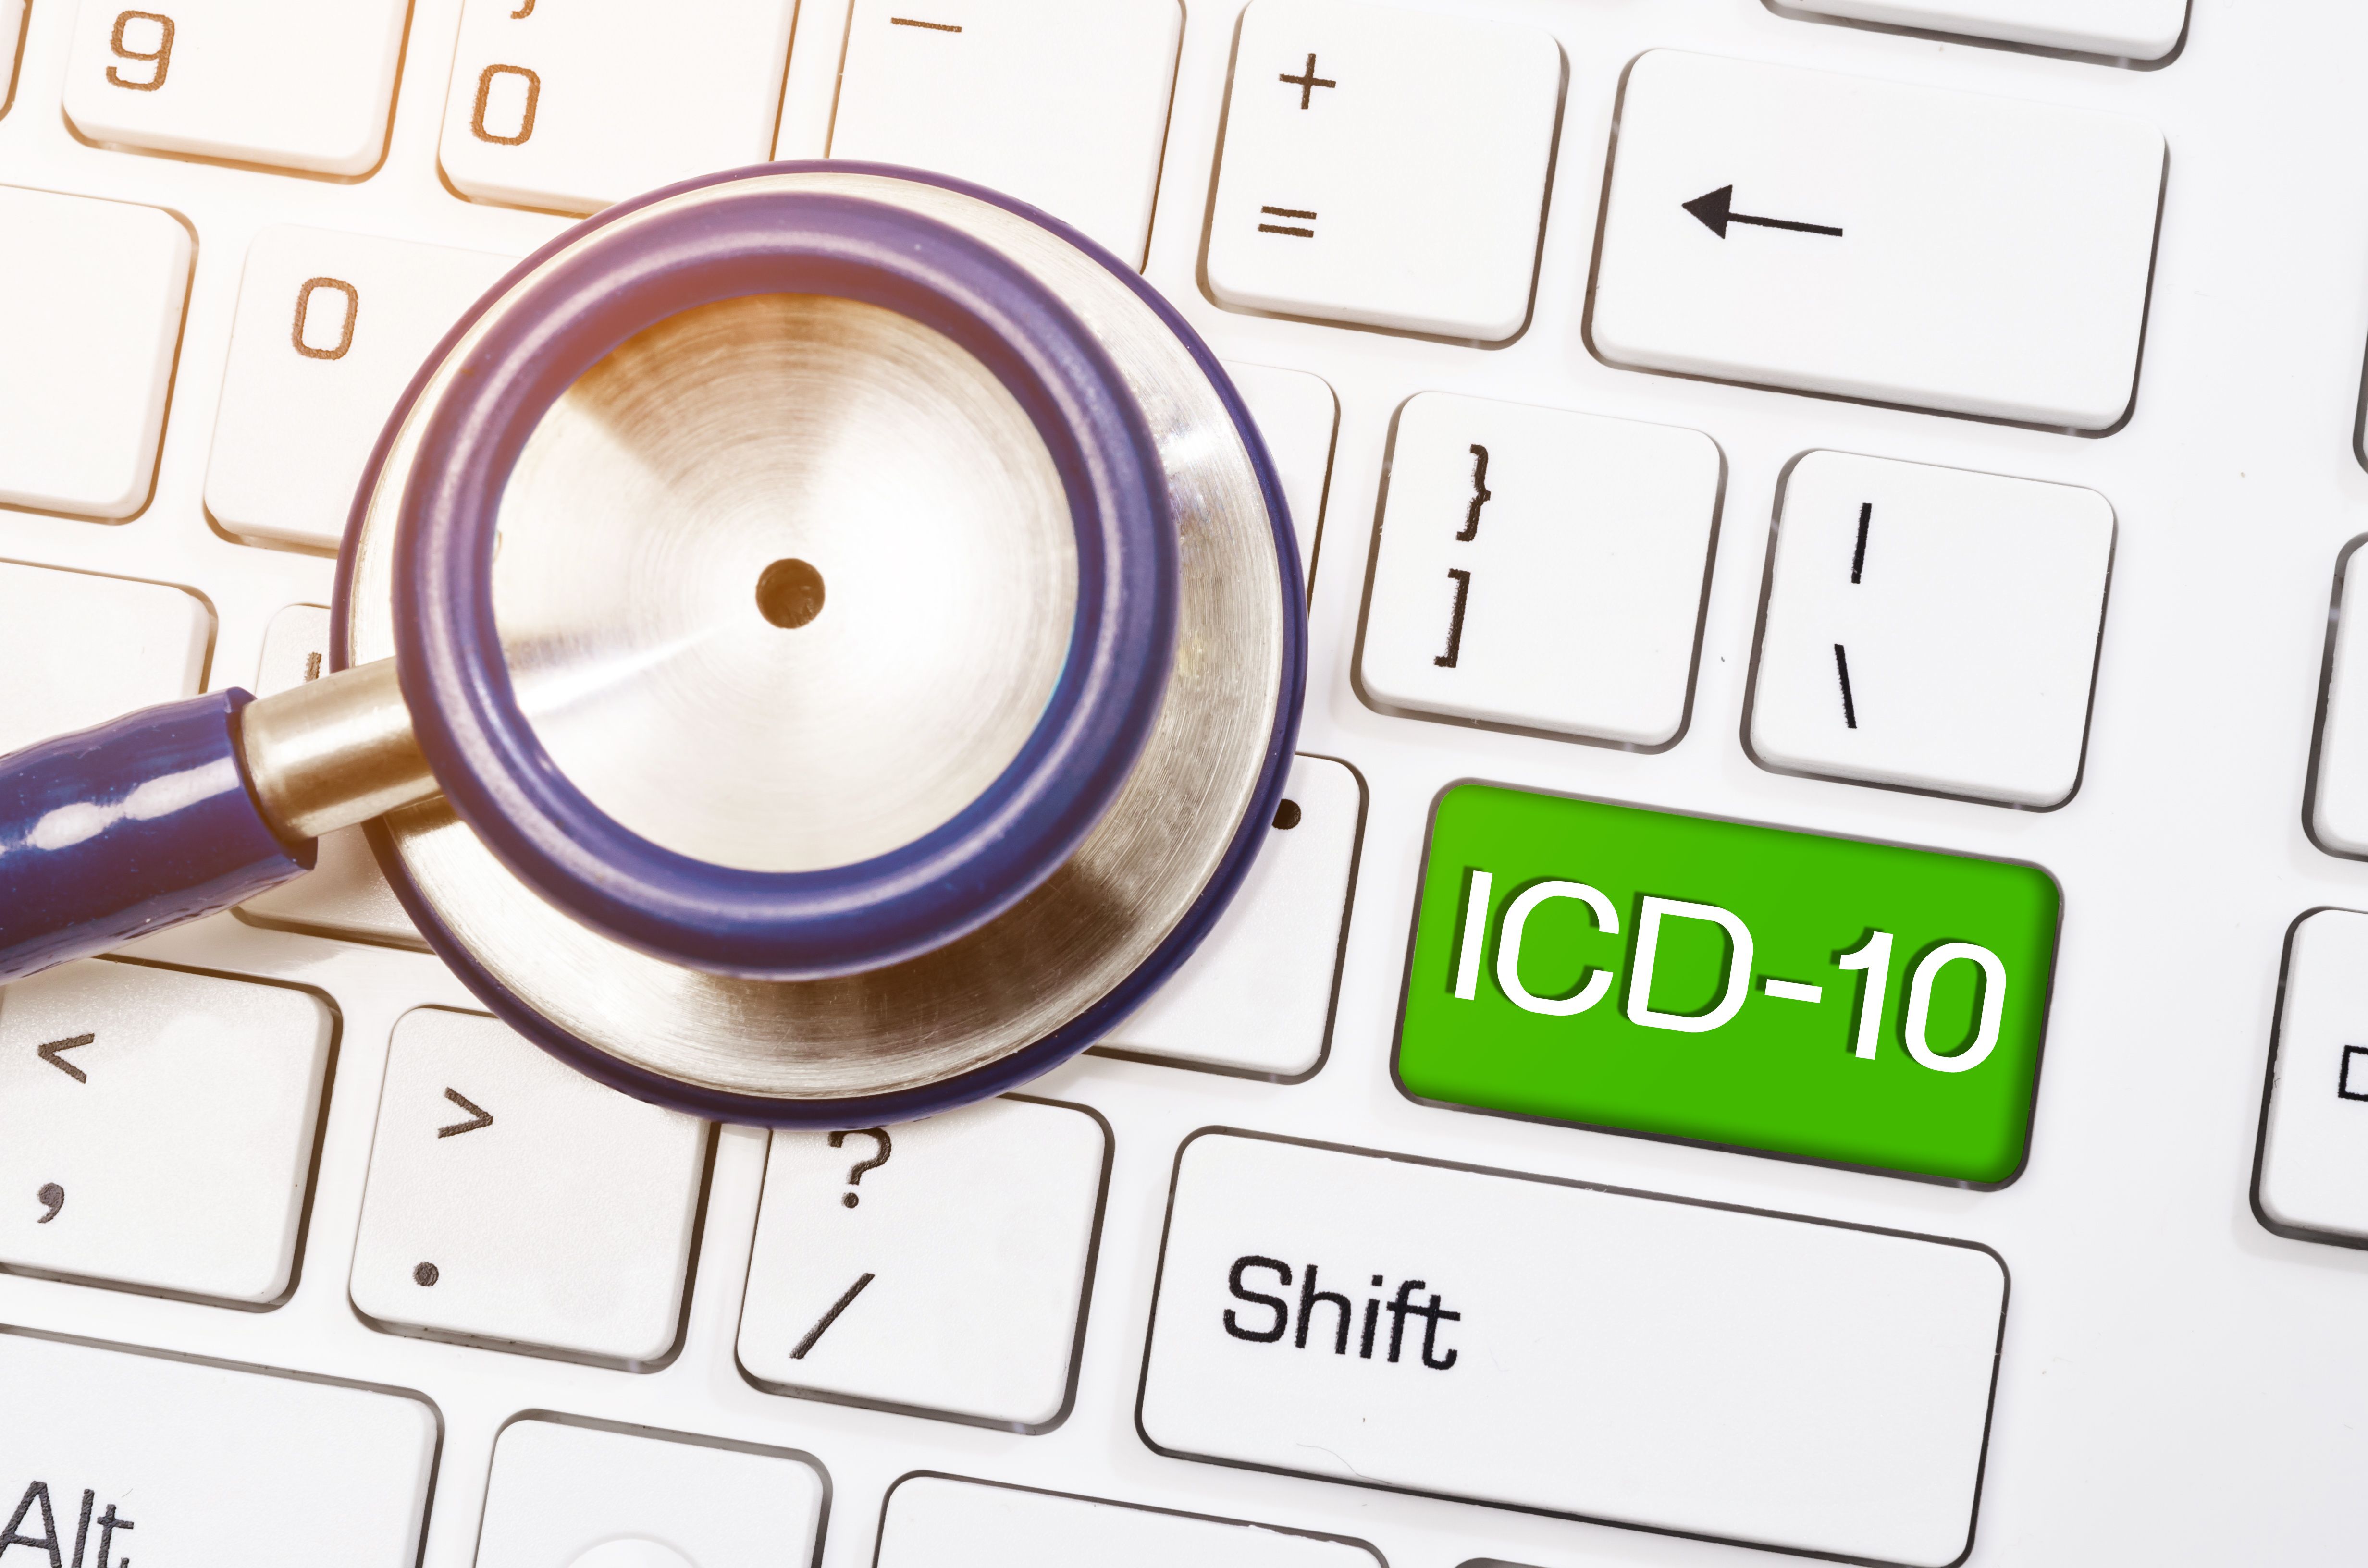 ICD-10 coding guideline changes for 2021 | Medical Economics